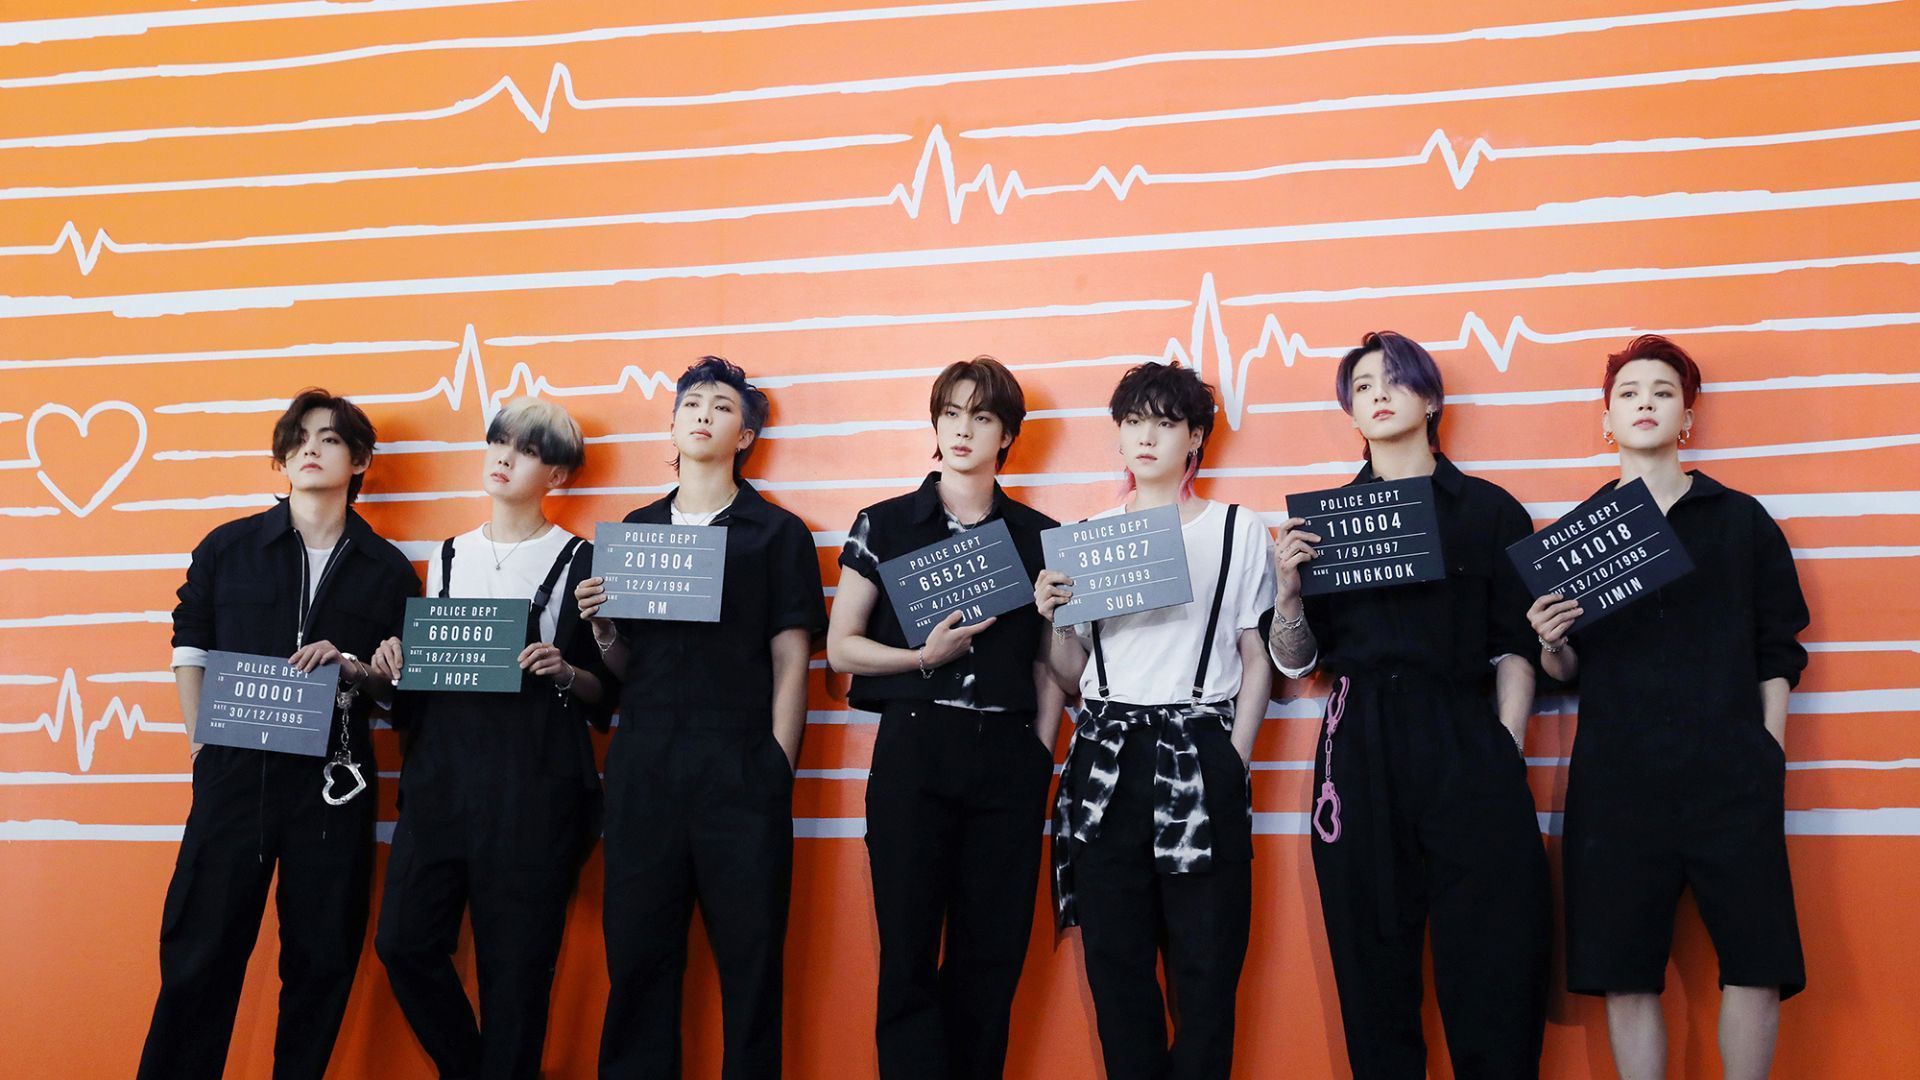 Louis Vuitton Jumps On The ARMY Wagon With Its Latest Instagram Stories  Swooning Over BTS - Koreaboo